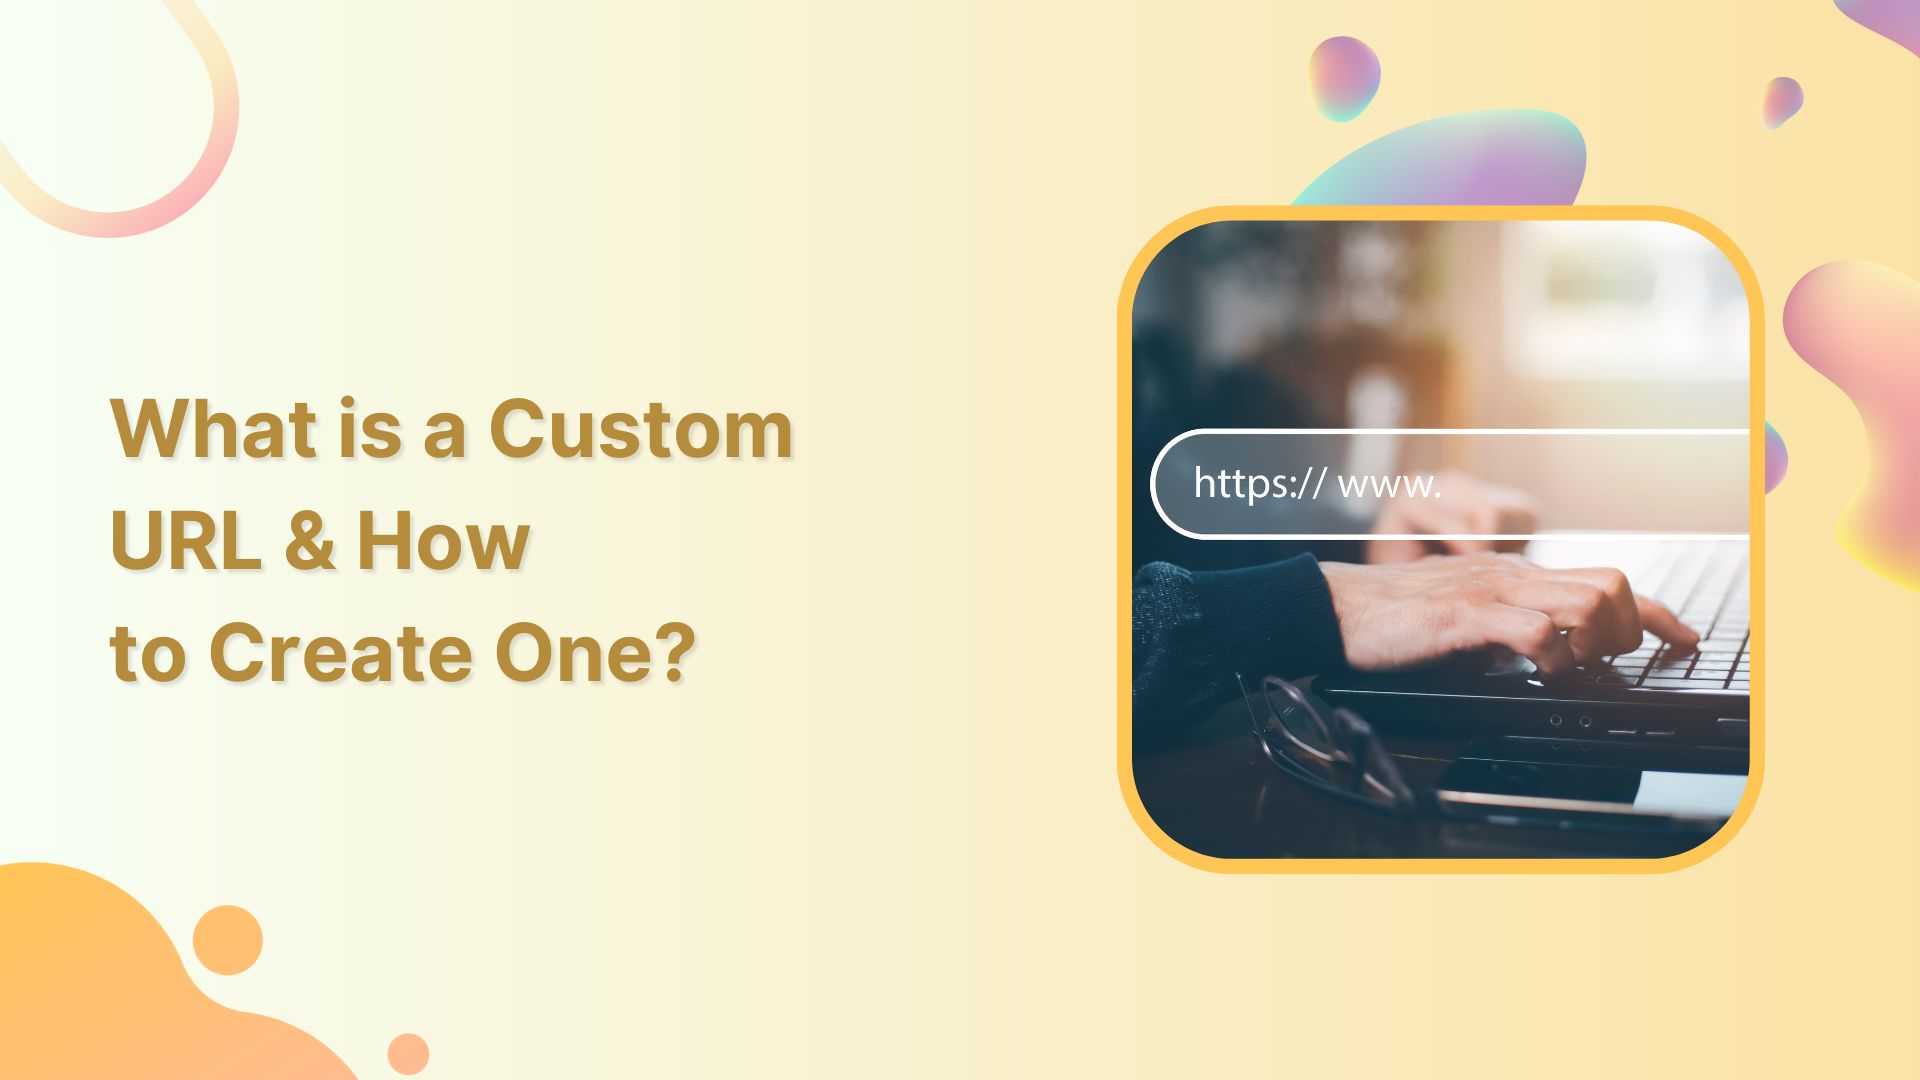 What is a Custom URL & How to Create One?